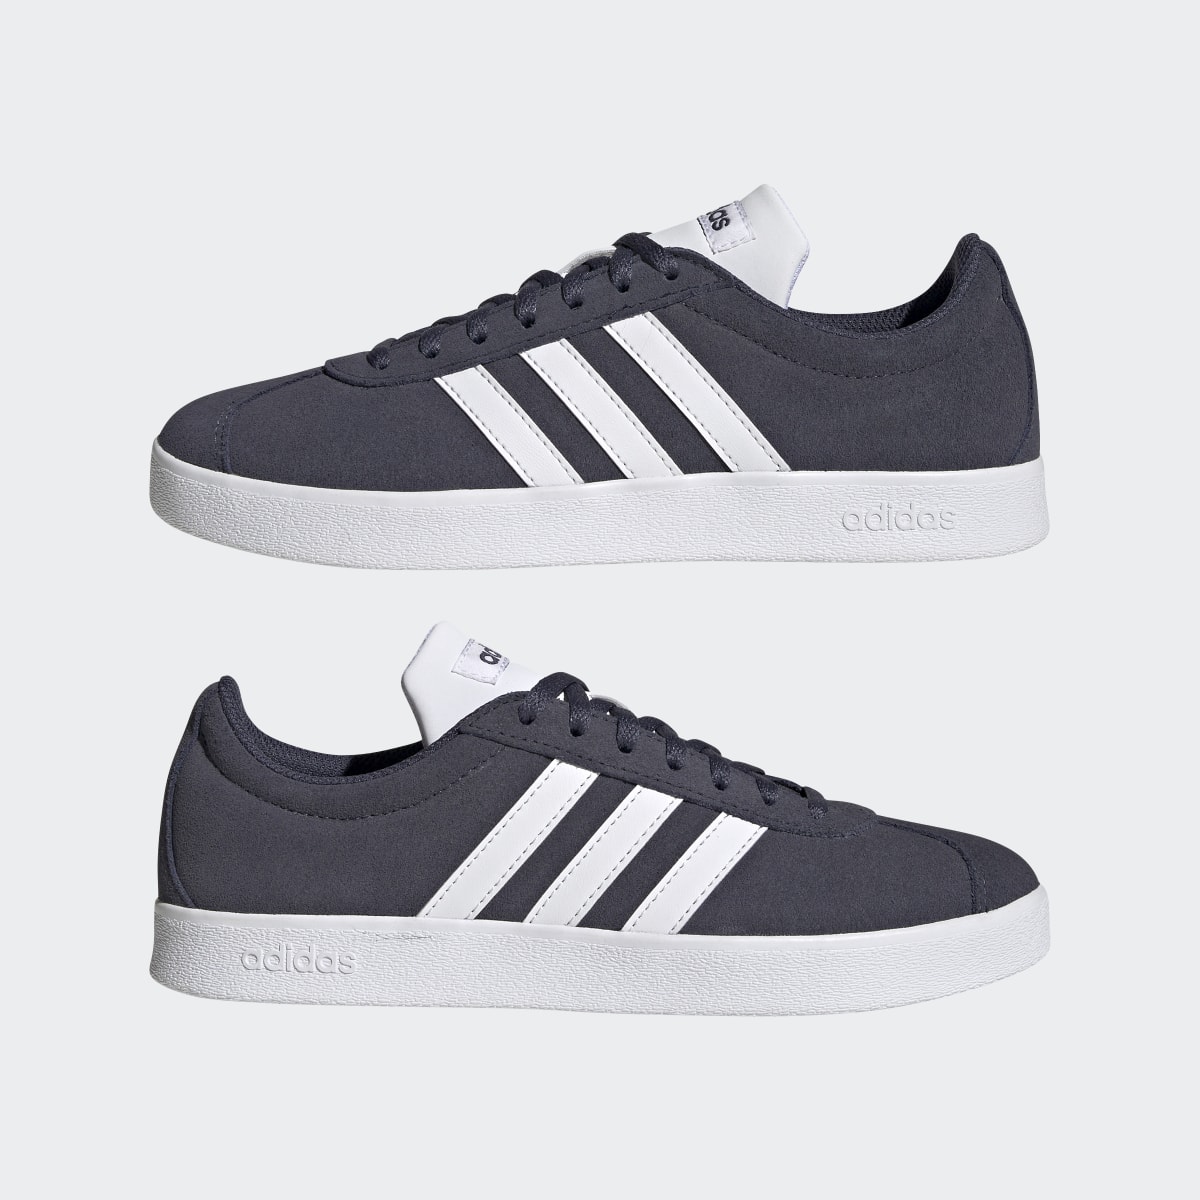 Adidas VL Court 2.0 Suede Shoes. 8